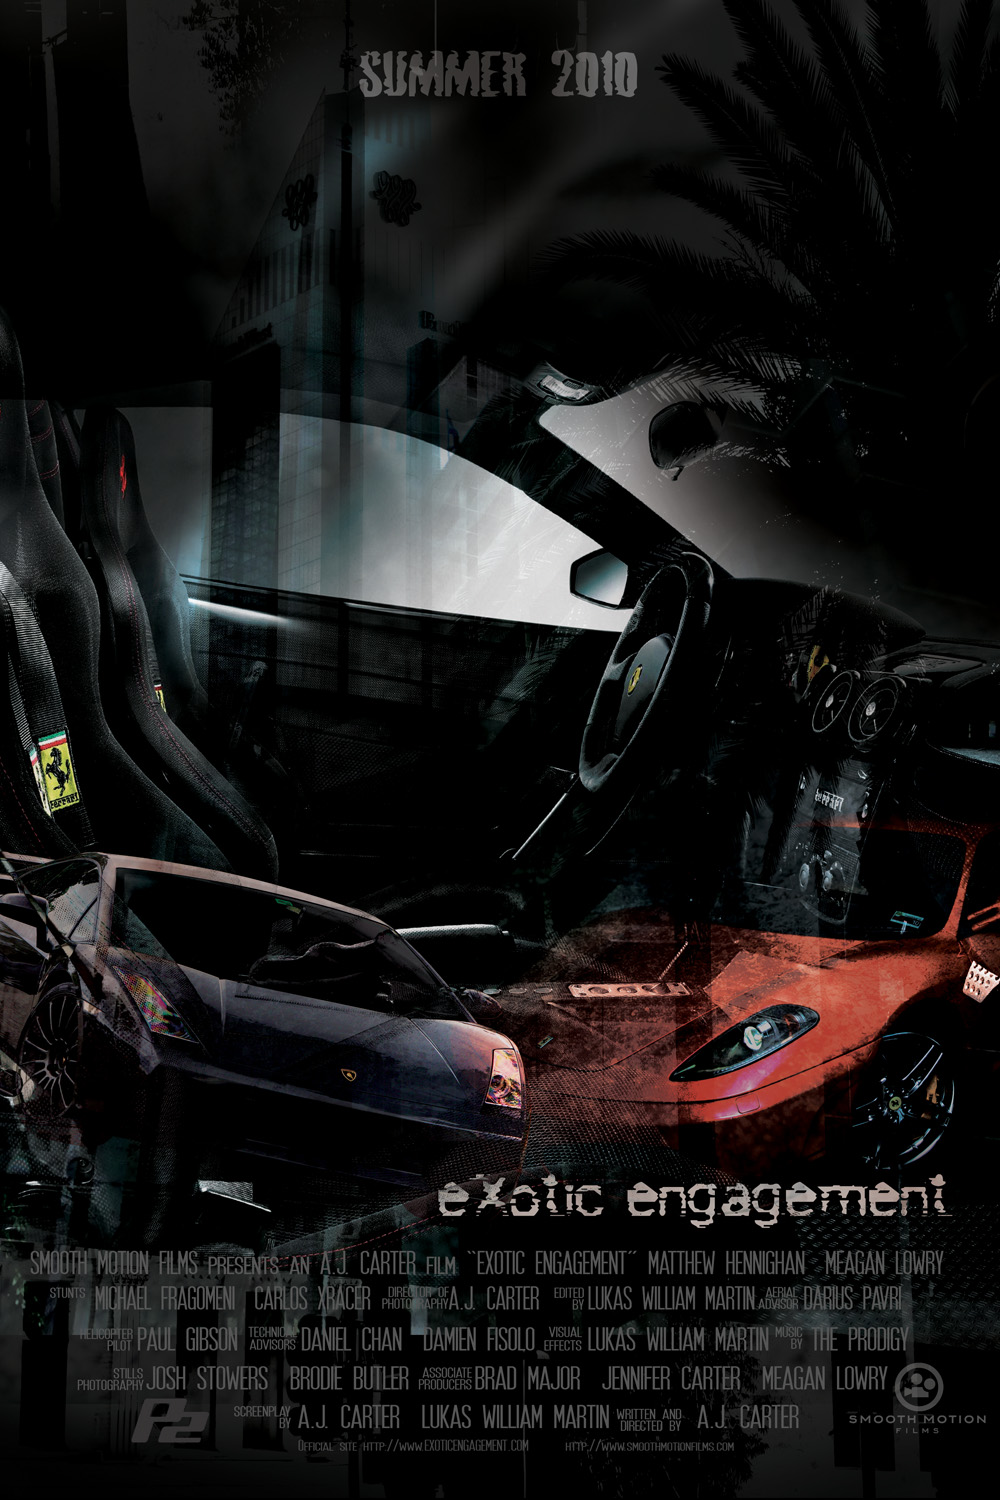 Exotic Engagement. Official film poster. Written & Direct by A.J. Carter 2009